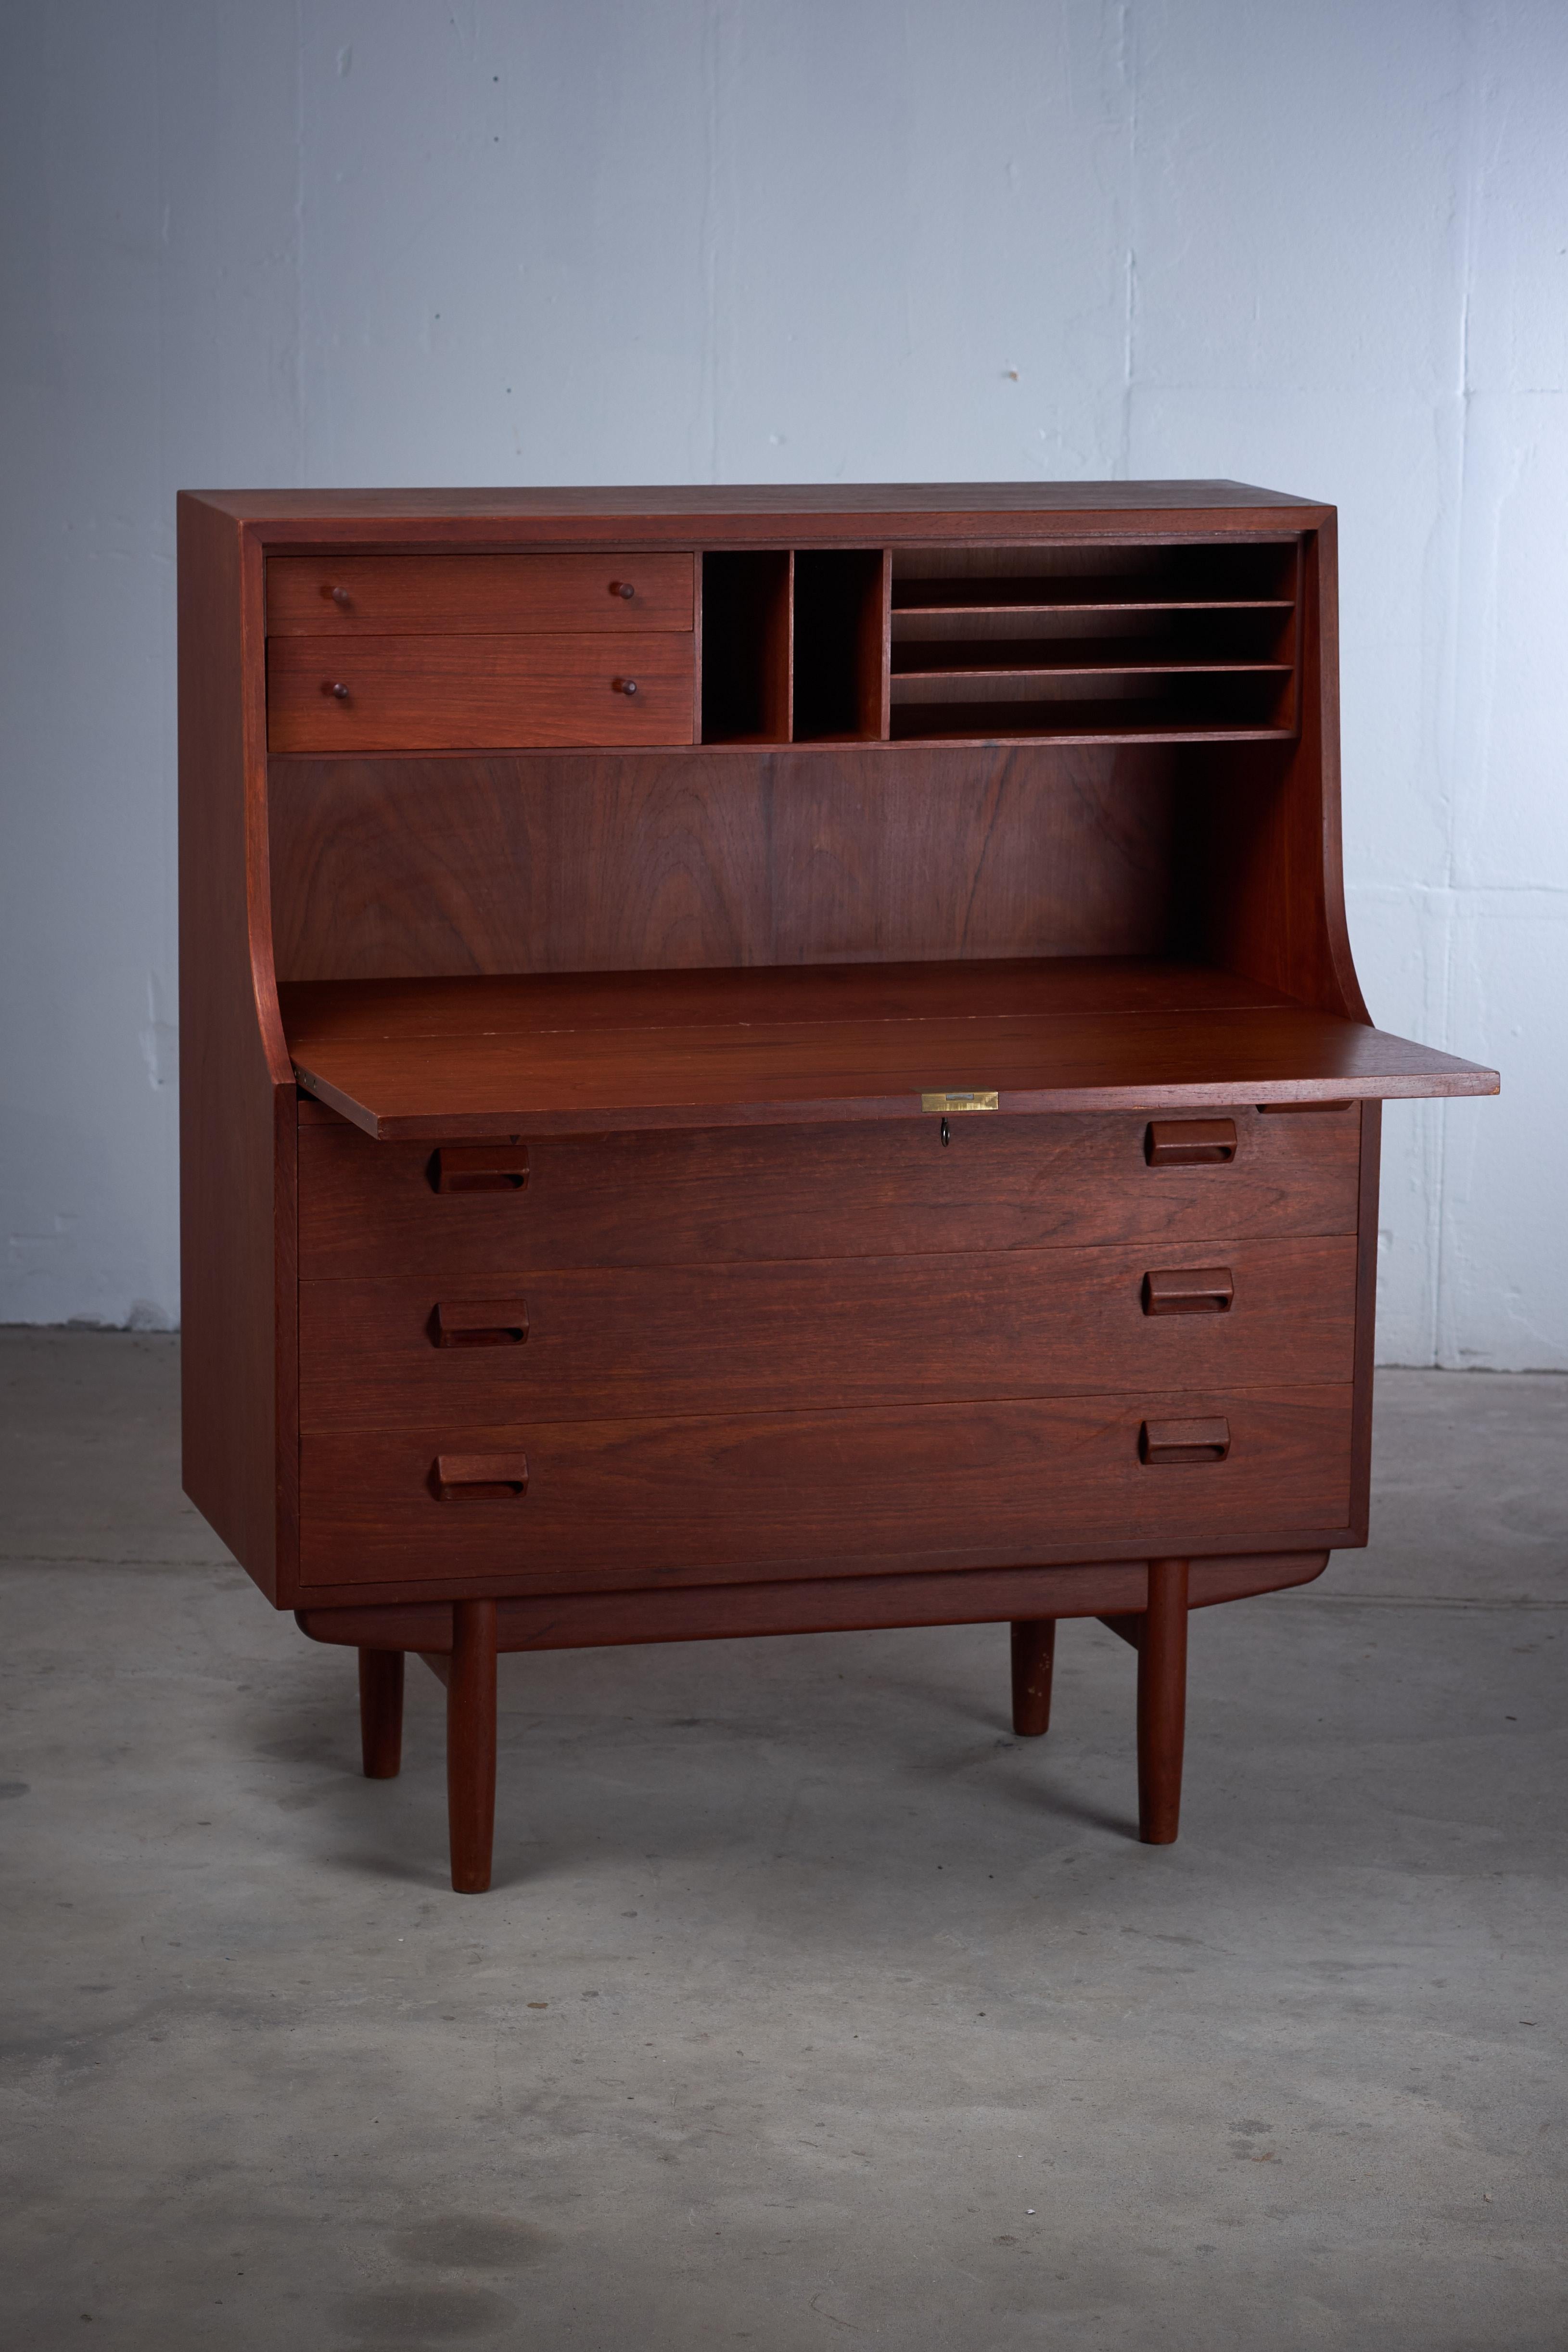 Teak secretary desk designed by Børge Mogensen for Søborg Møbelfabrik, circa 1950. Danish design. Great piece and like many of his other furniture produced by Søborg, this piece of furniture is in really high quality.
The secretary is in good